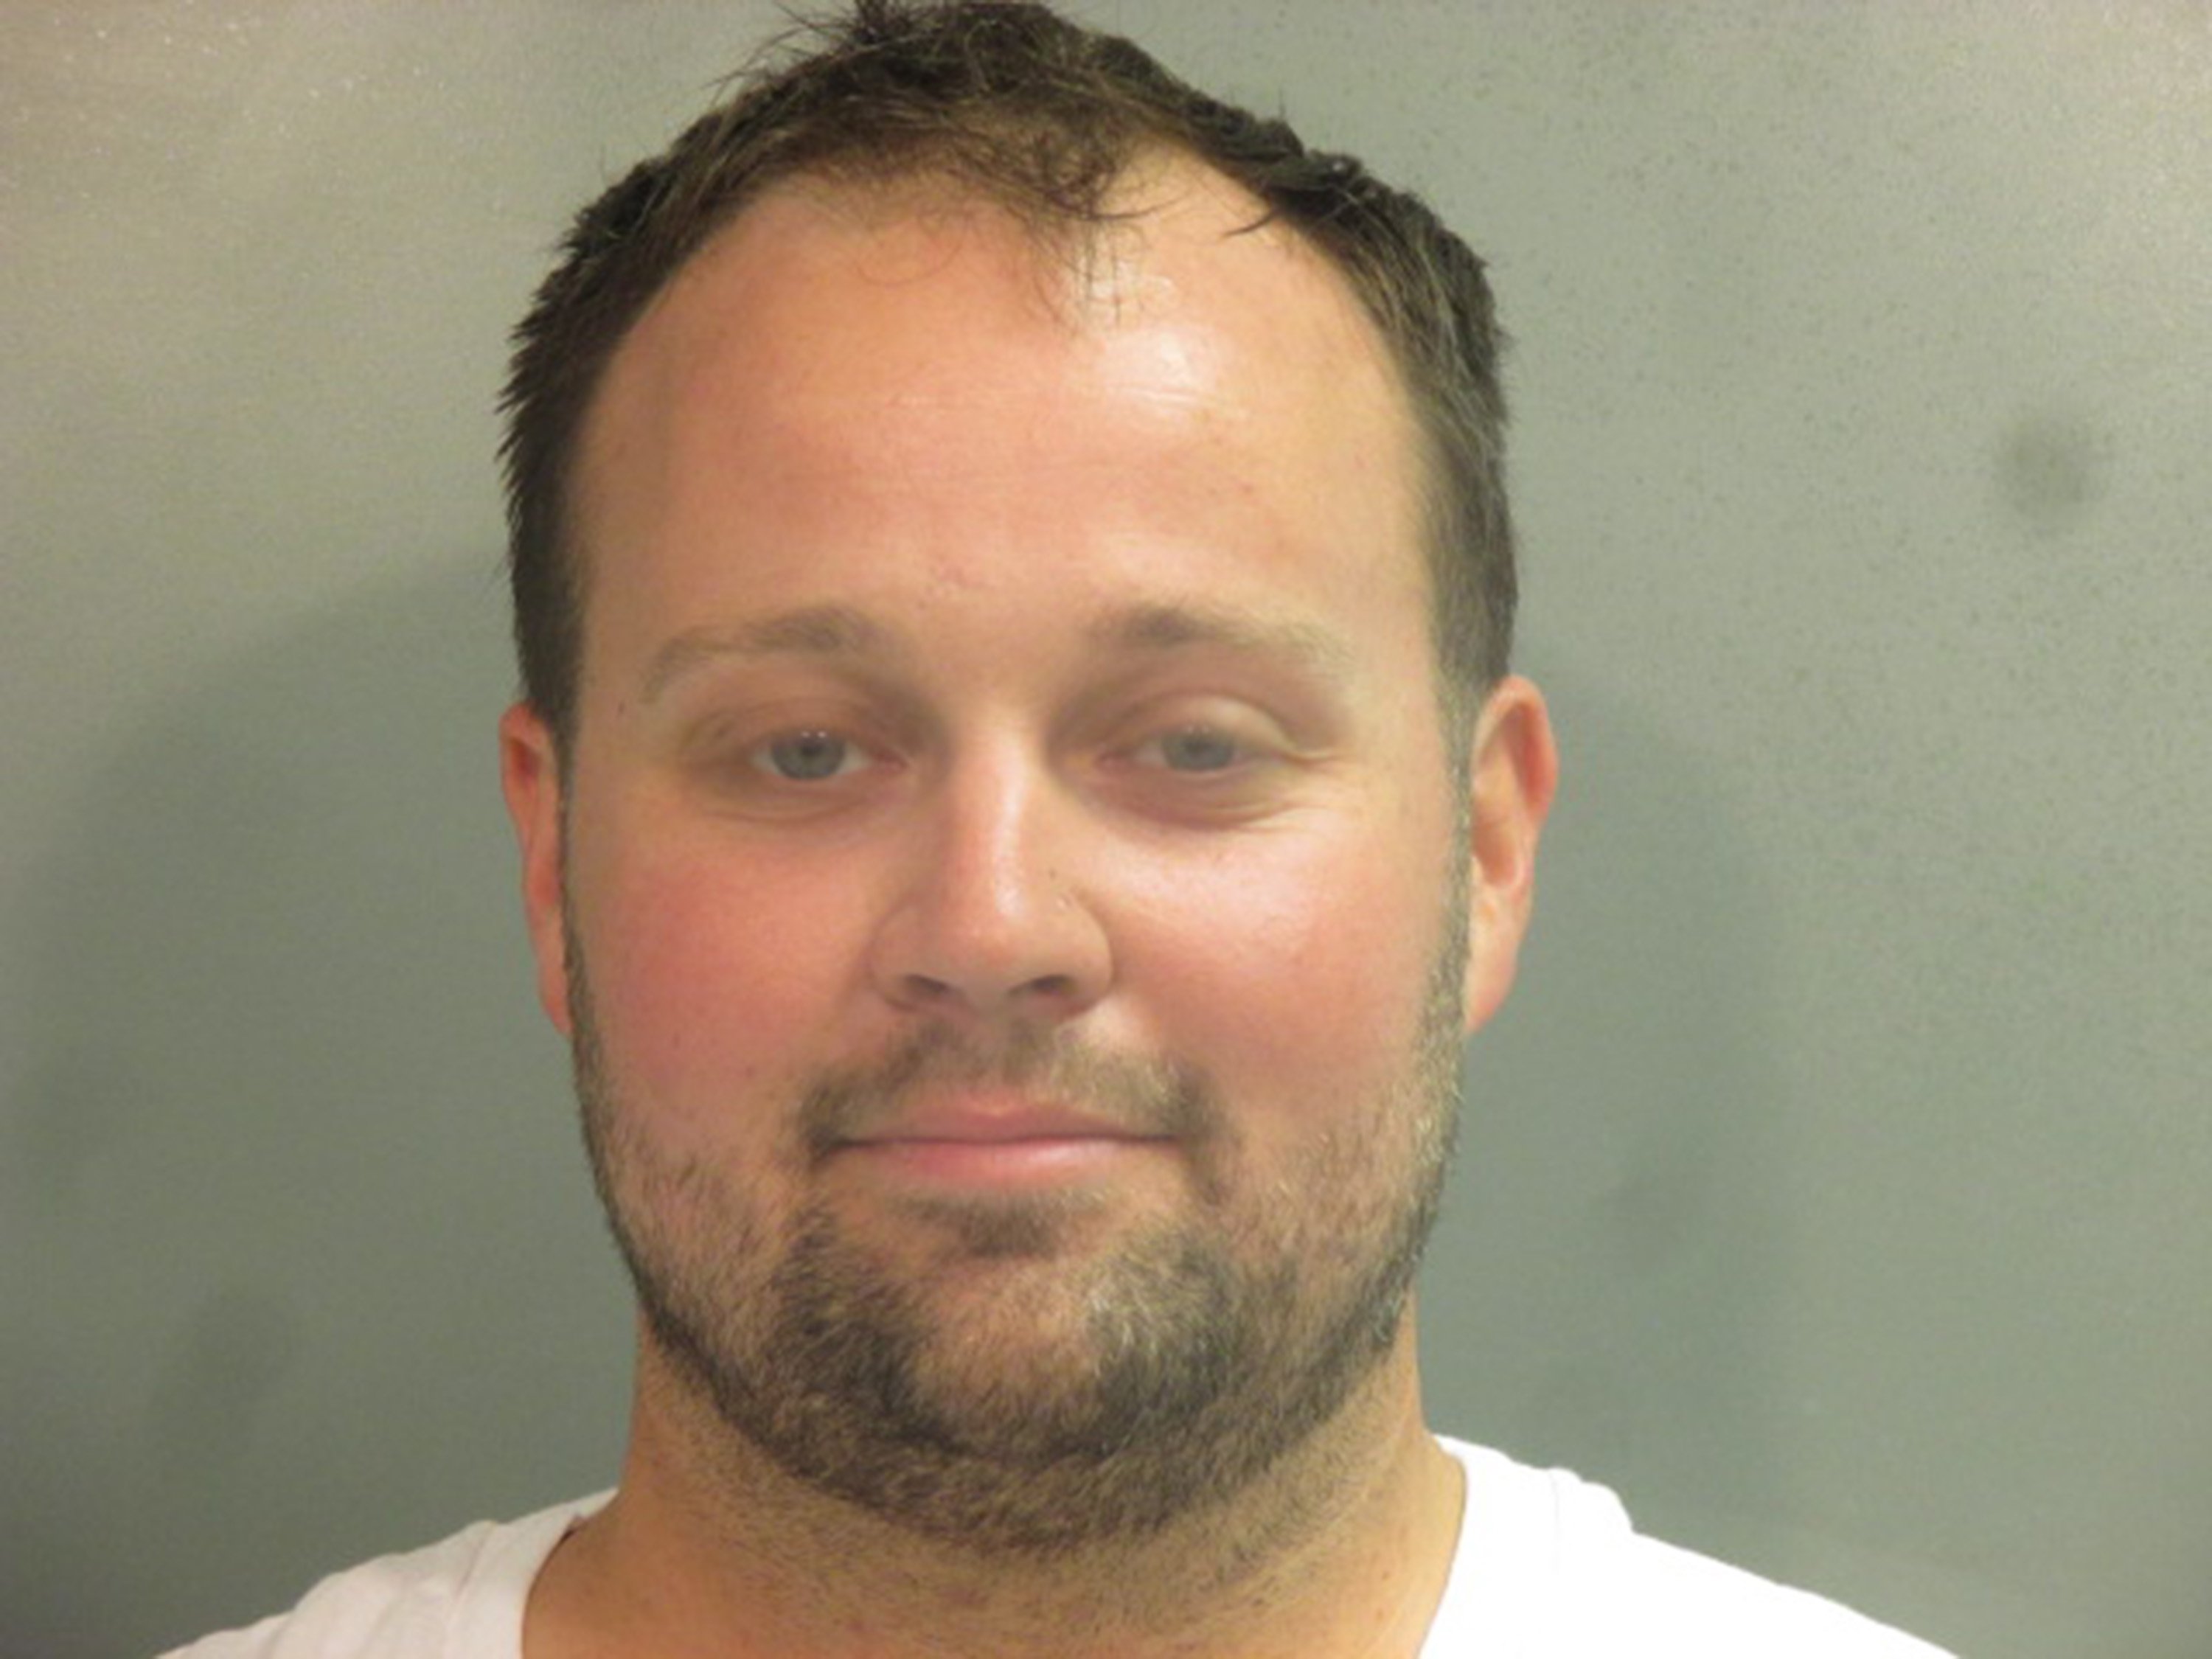 Josh Duggar is seen in a booking photo at the Washington County Sheriff's Office in April 2021